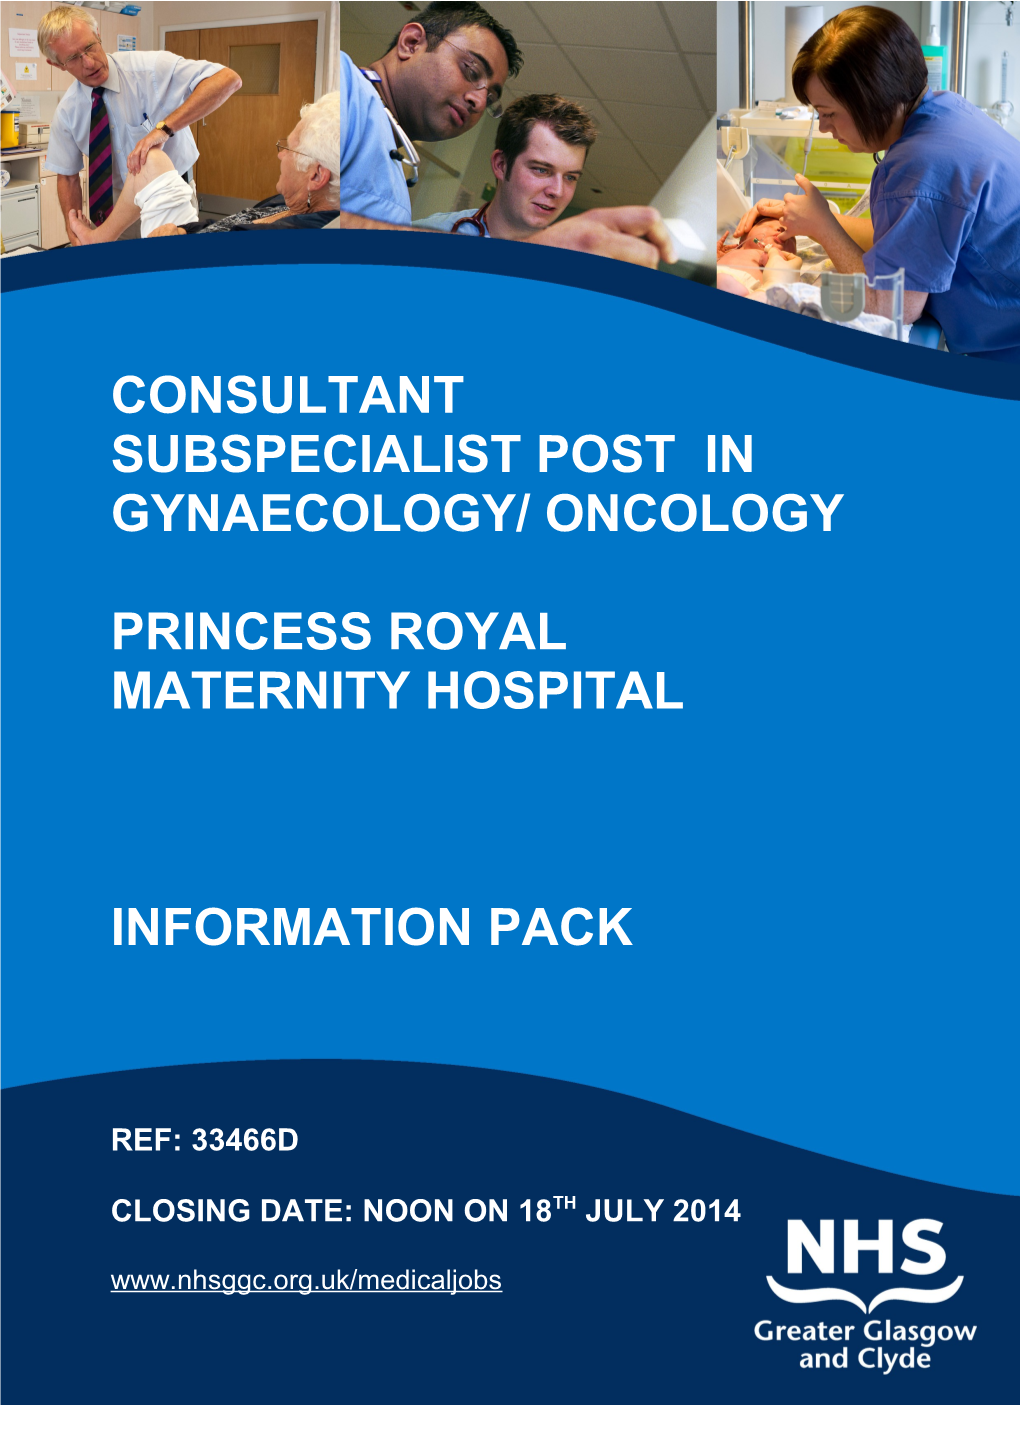 Consultant Subspecialist Post in Gynaecology/ Oncology